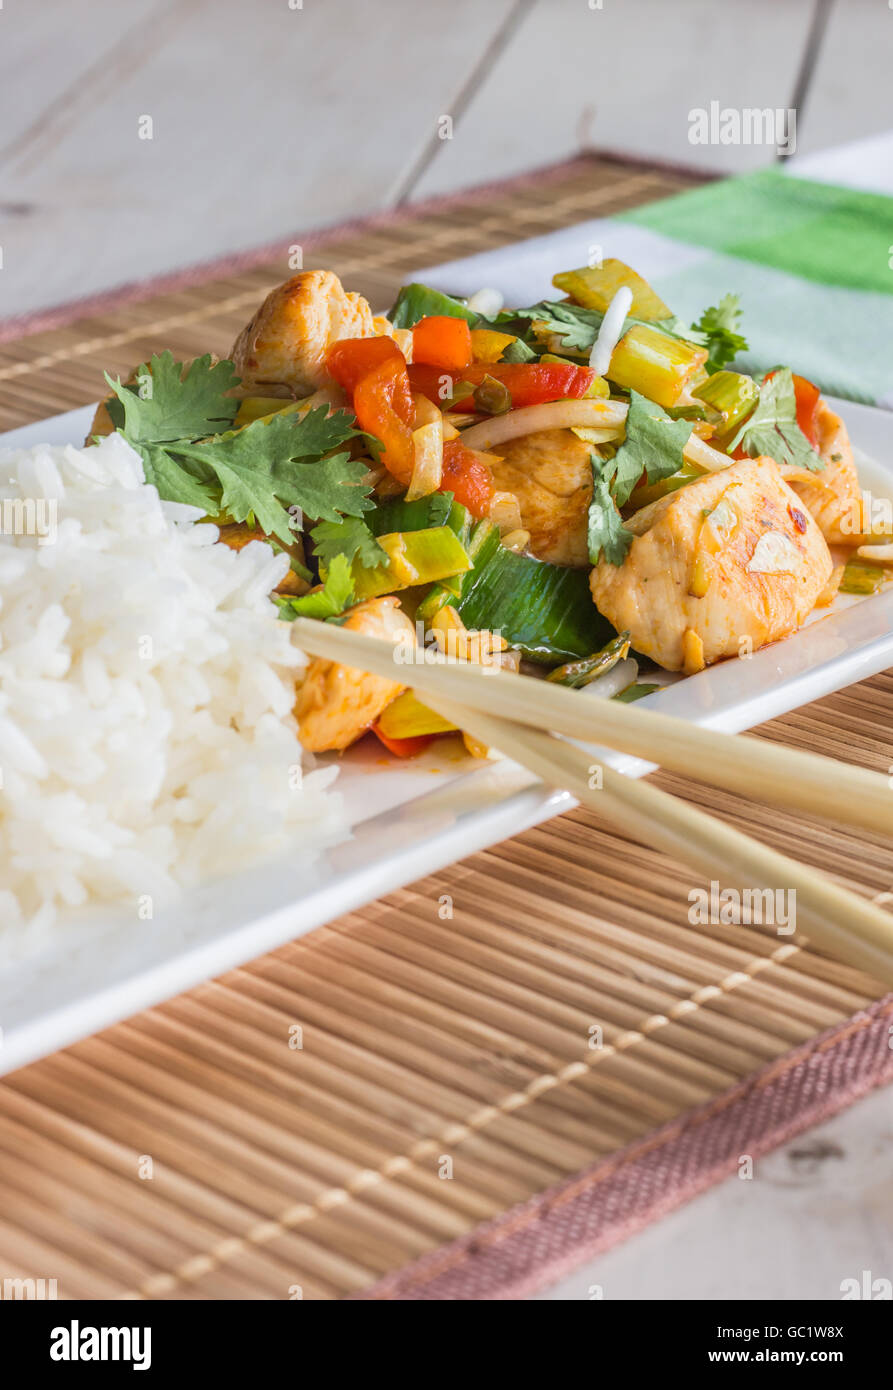 Asian dish with chicken, vegetables, cilantro and leek Stock Photo